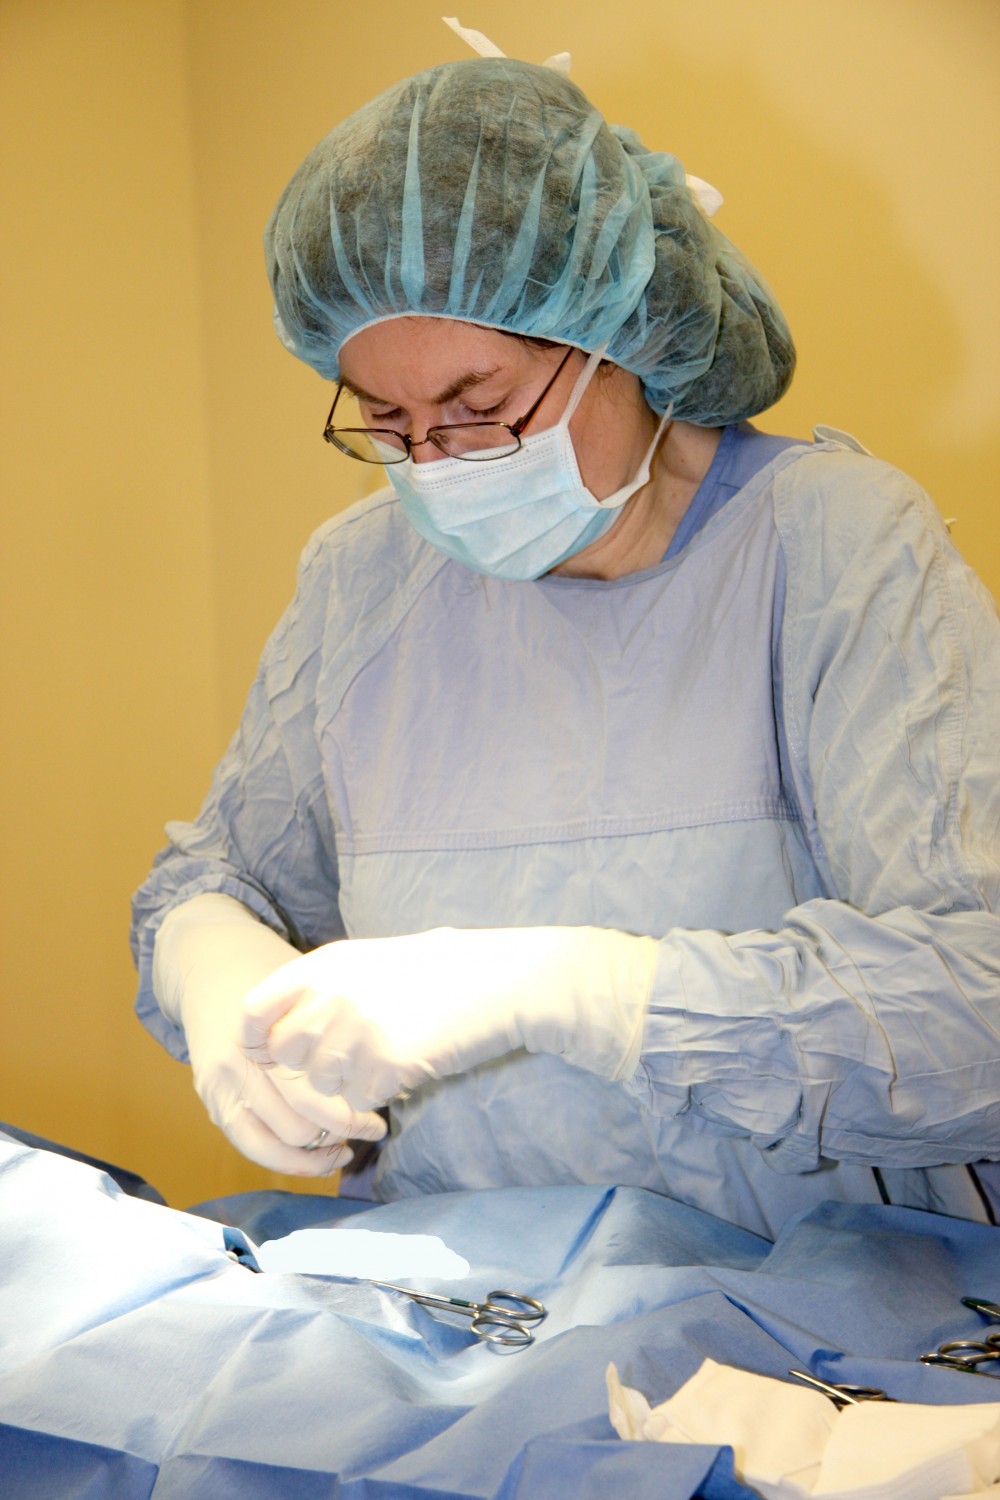 Veterinary worker performing surgery